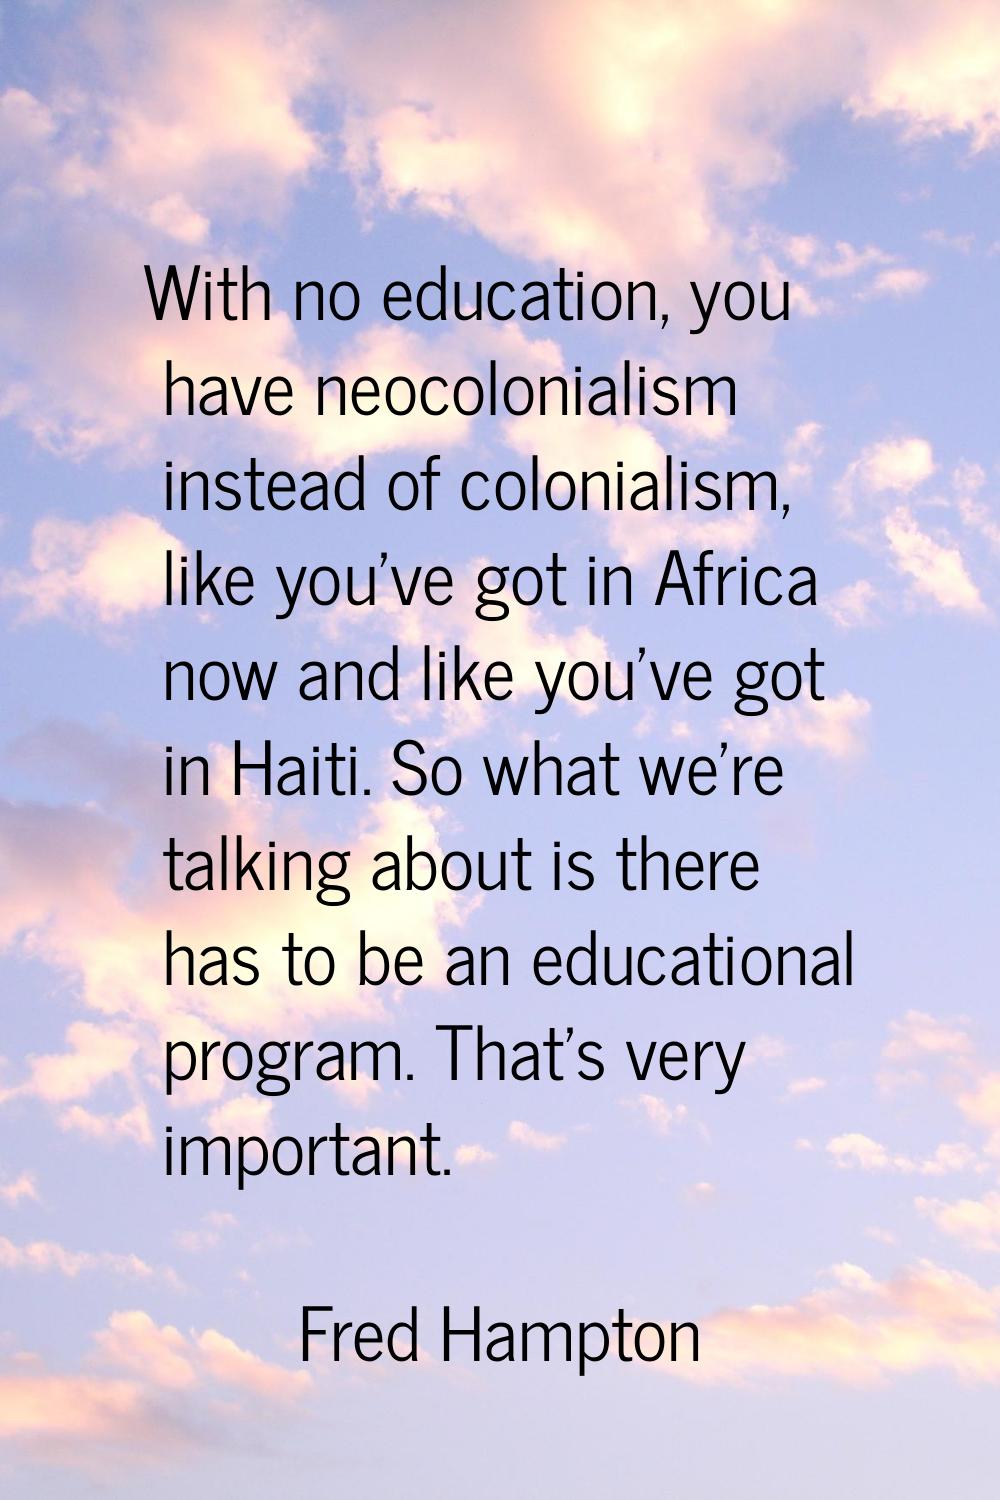 With no education, you have neocolonialism instead of colonialism, like you've got in Africa now an